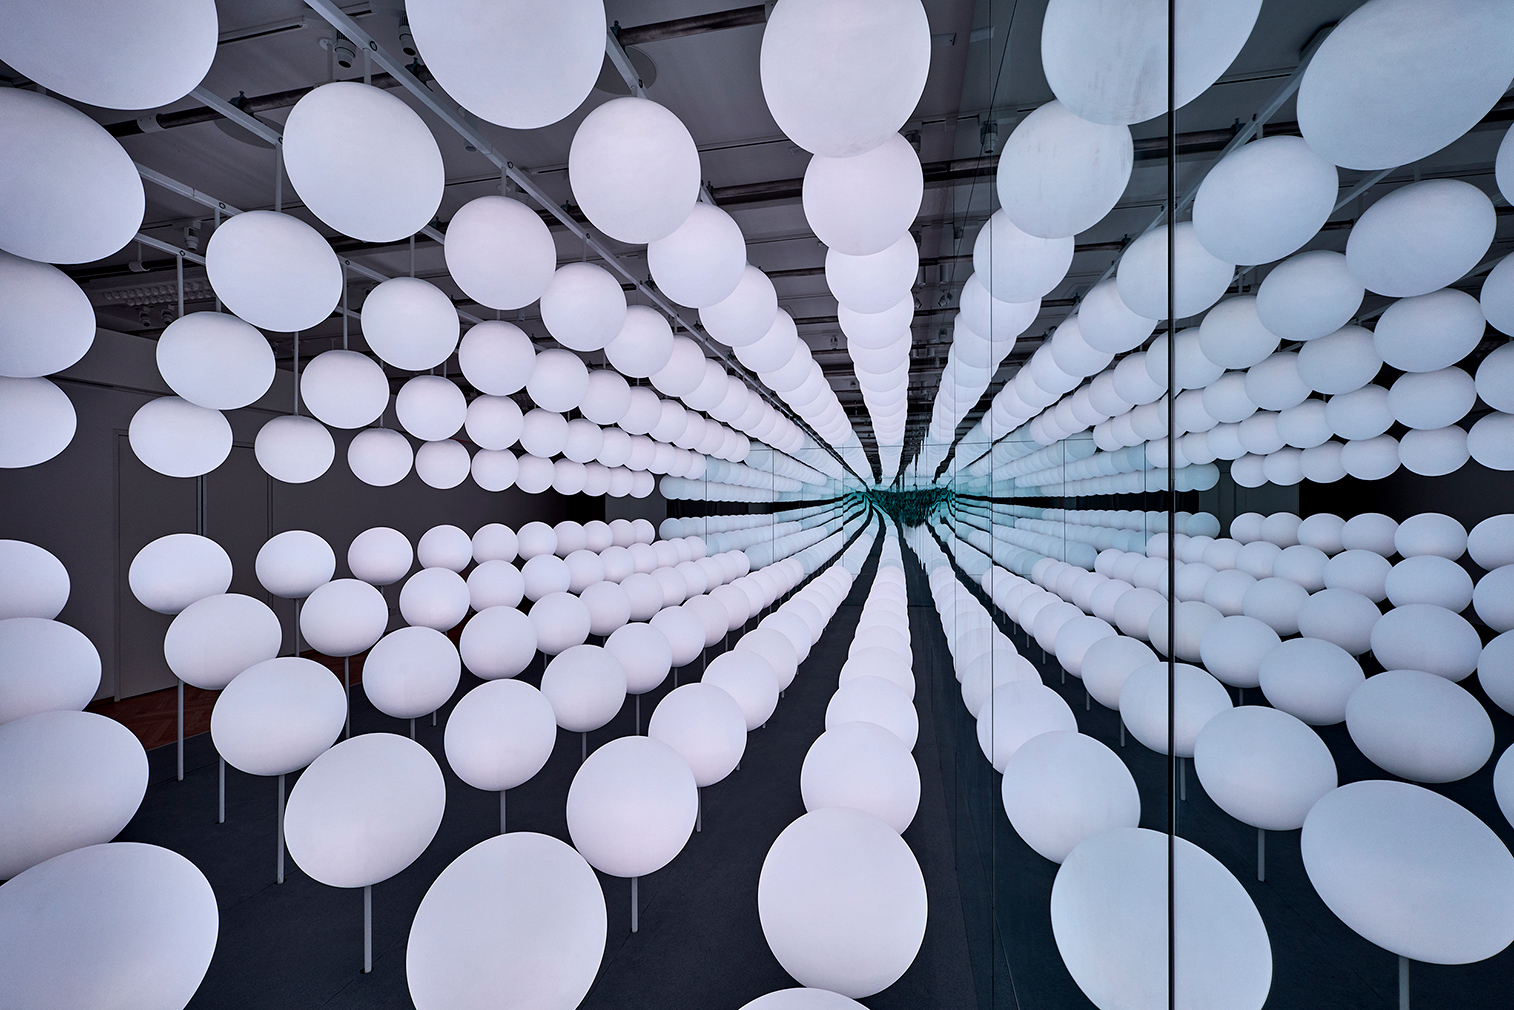 Snarkitecture’s new installation puts a spin on the classic 'funhouse'